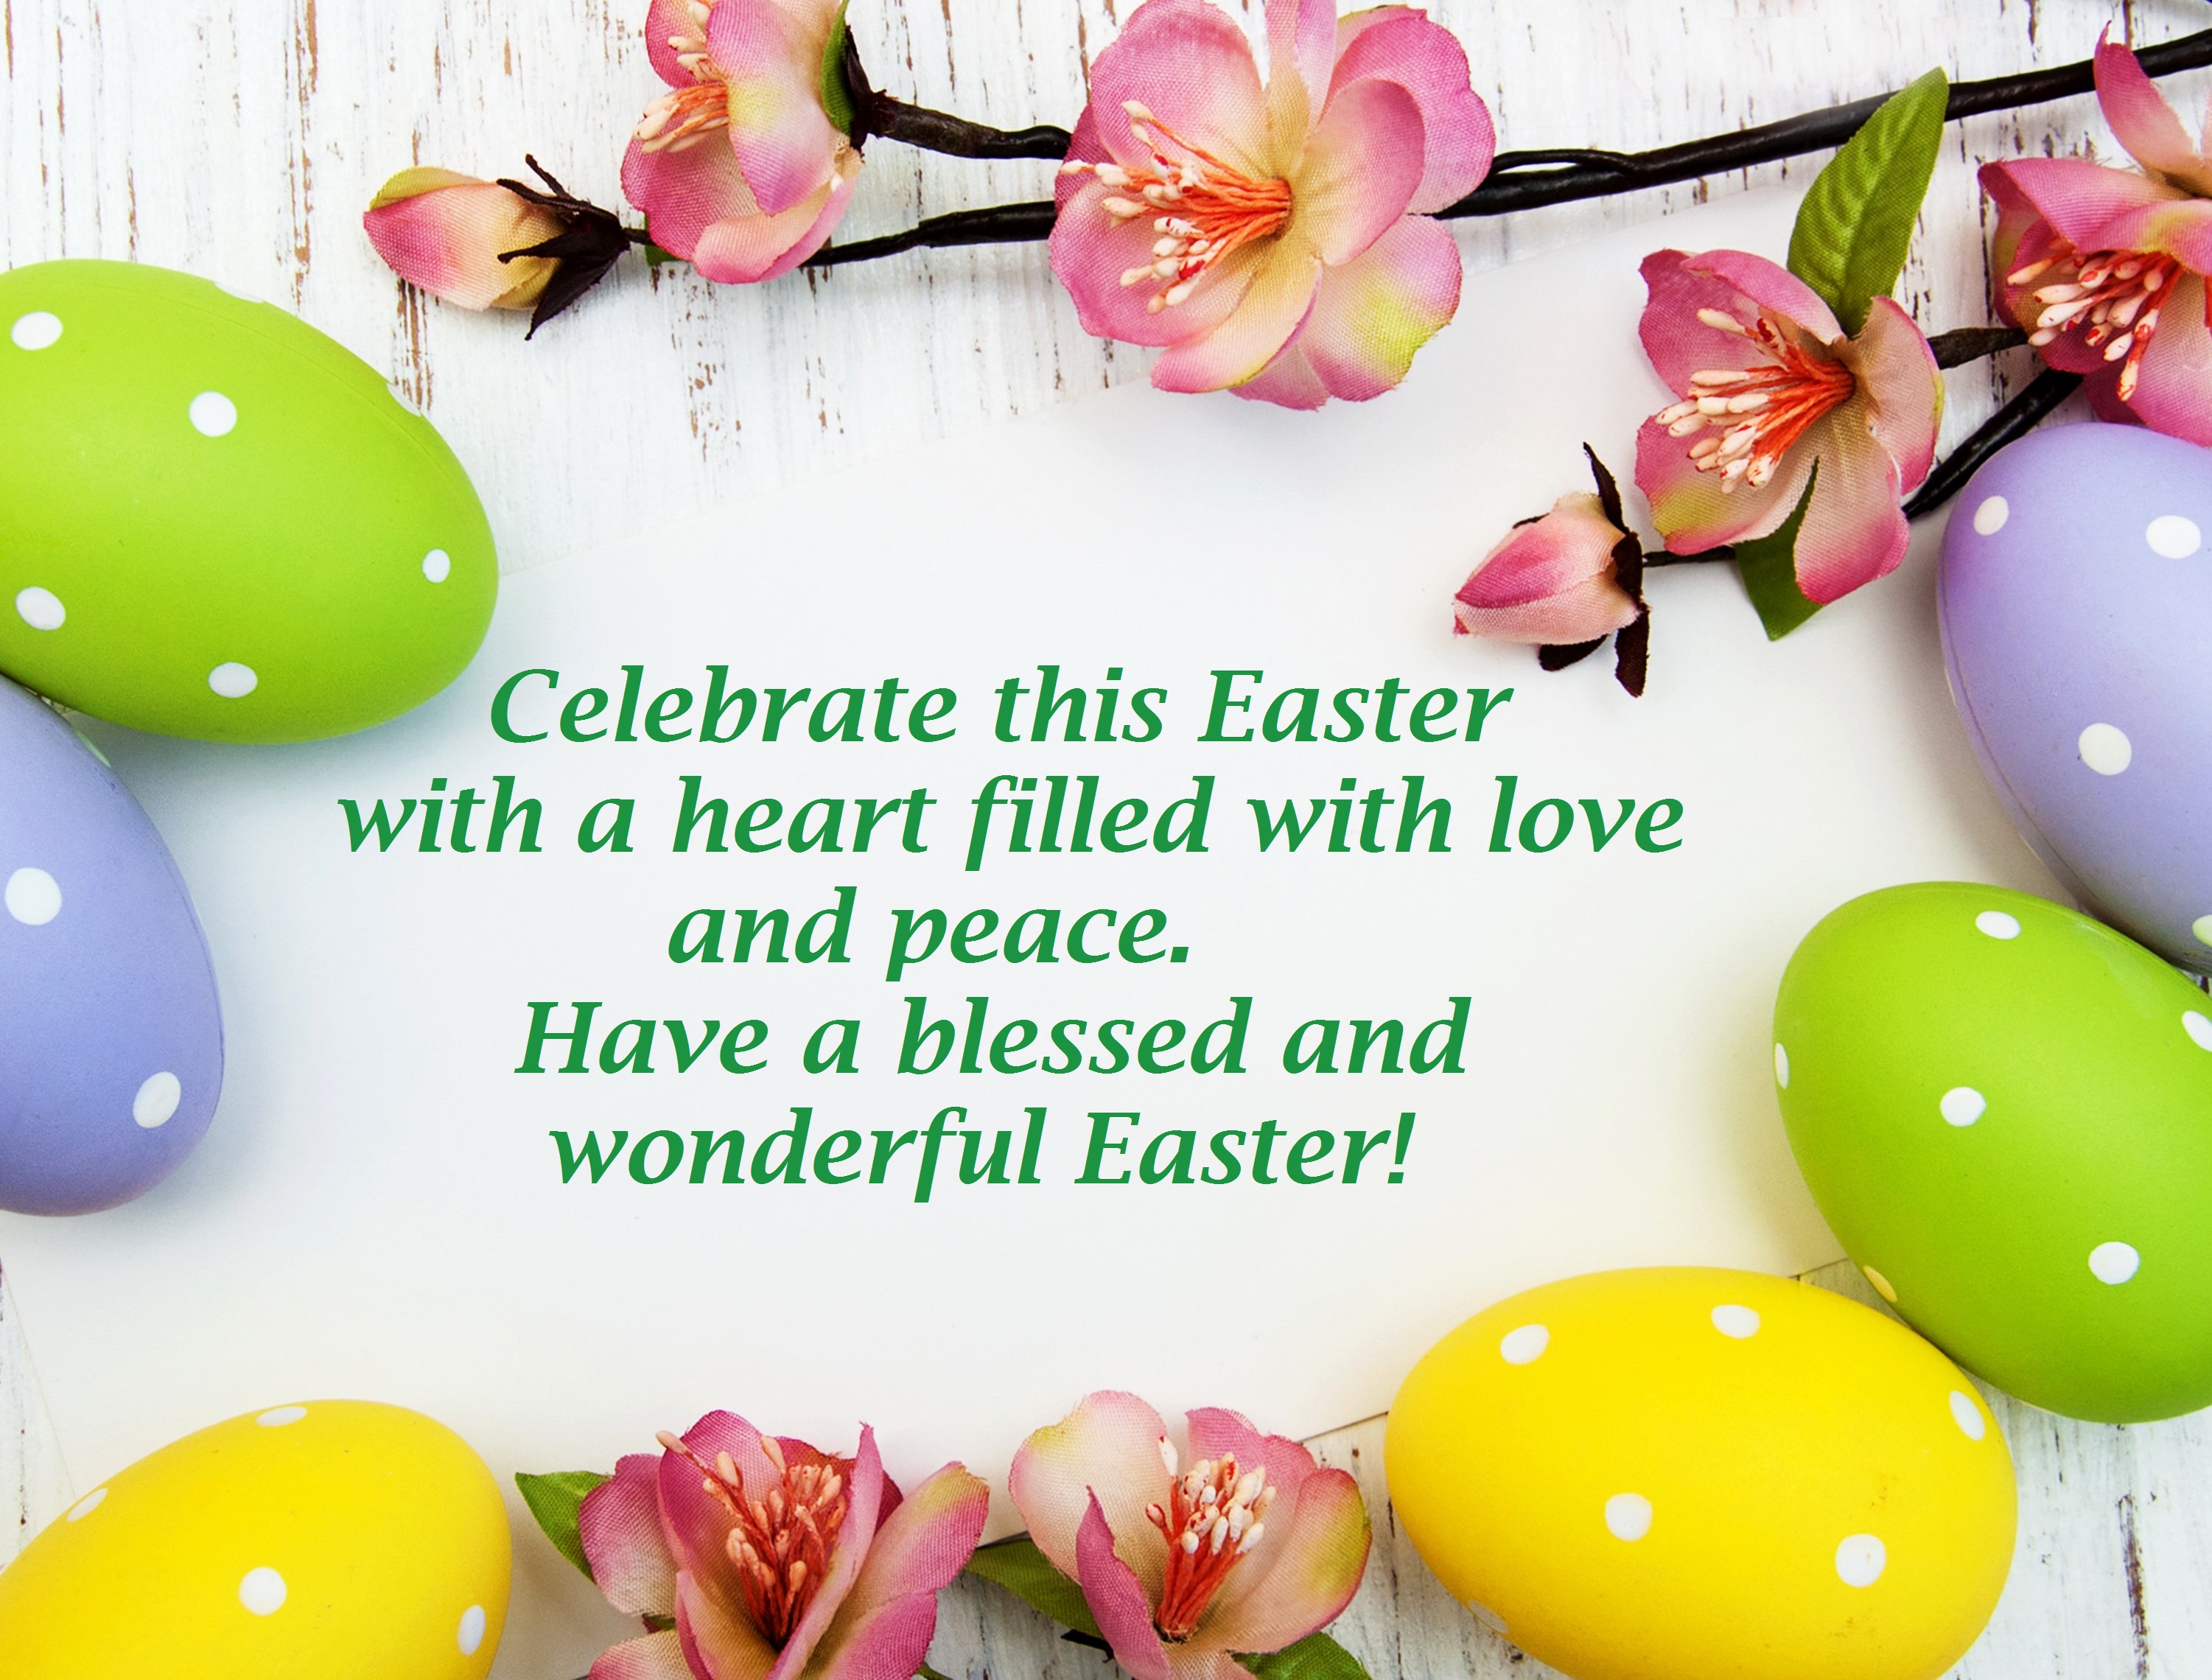 lovely wishes for easter